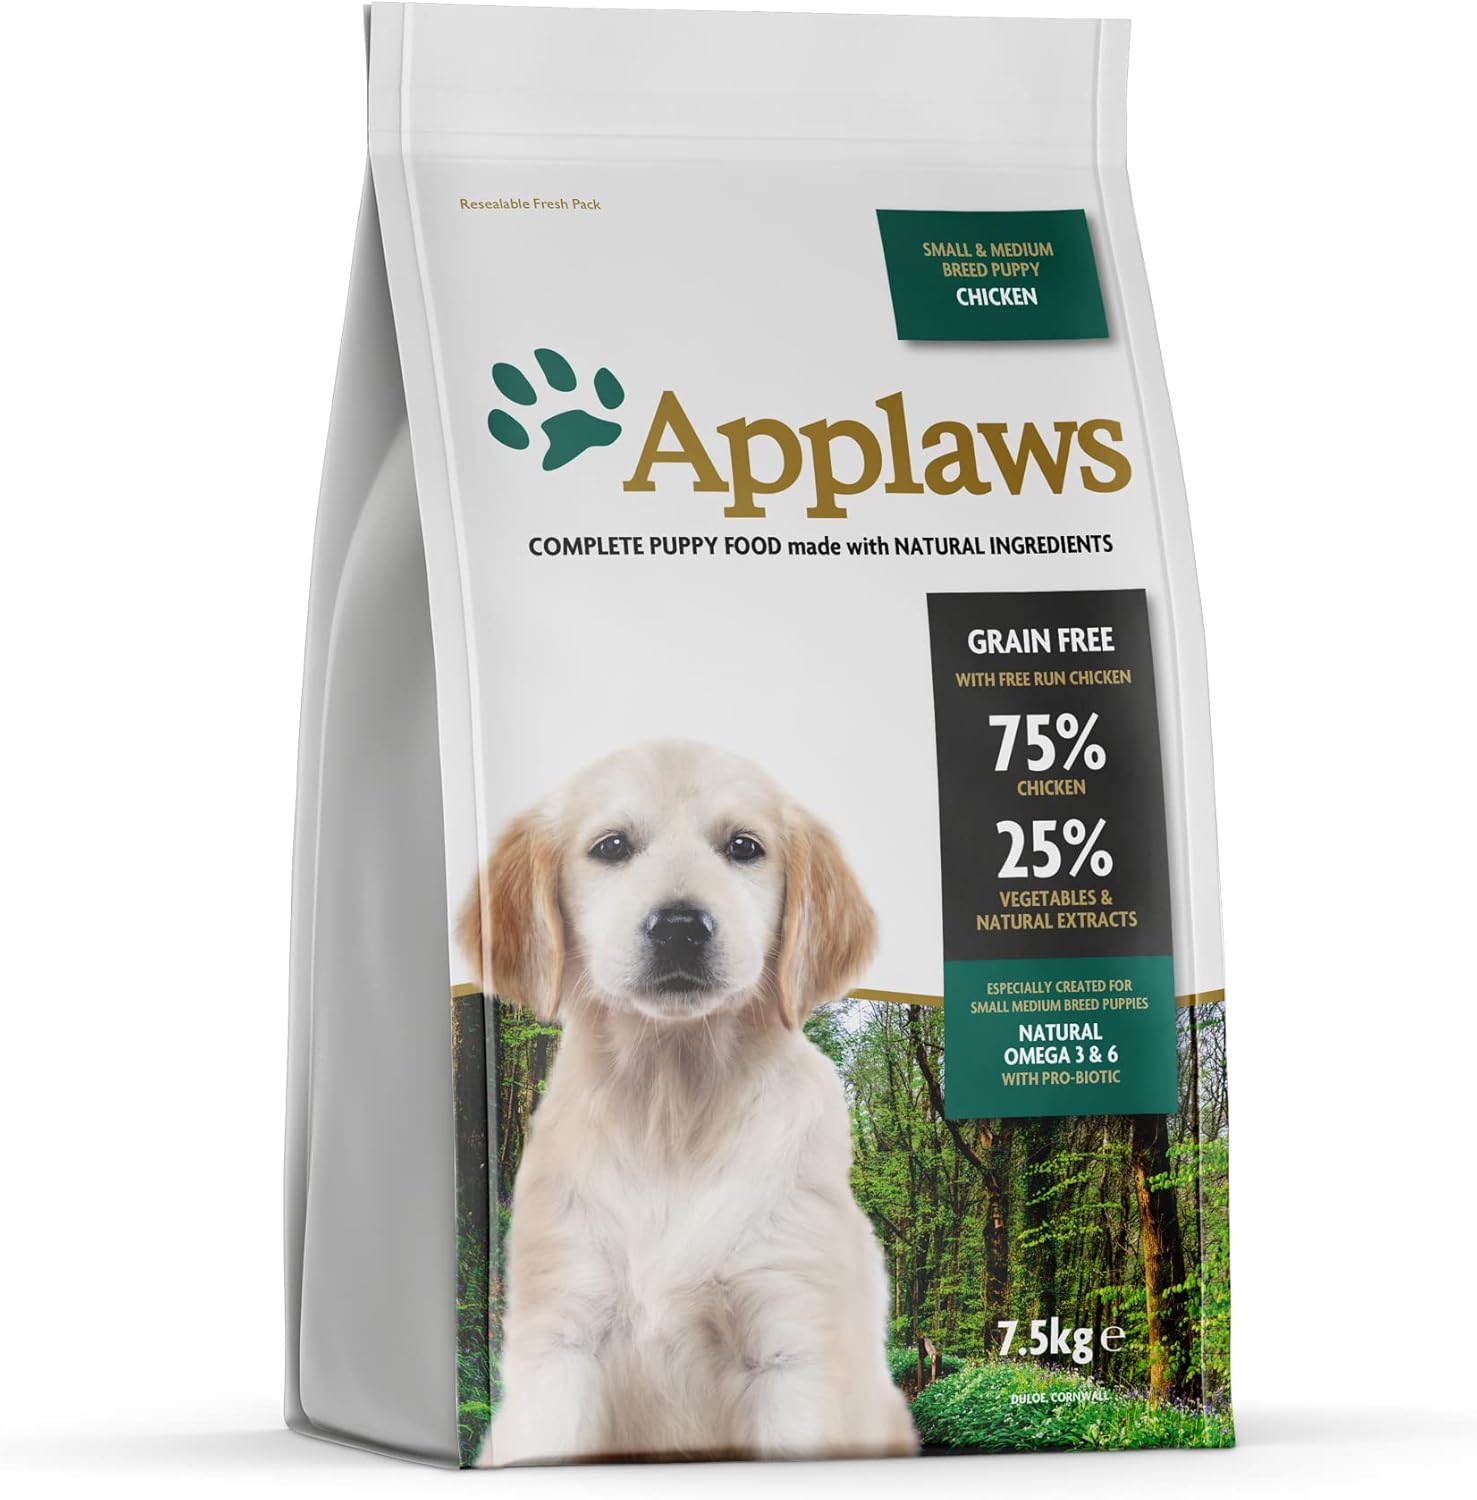 Applaws Complete and Grain Free Dry Puppy Food for Medium and Small Dogs, Chicken, 7.5 kg (Pack of 1)?9100981